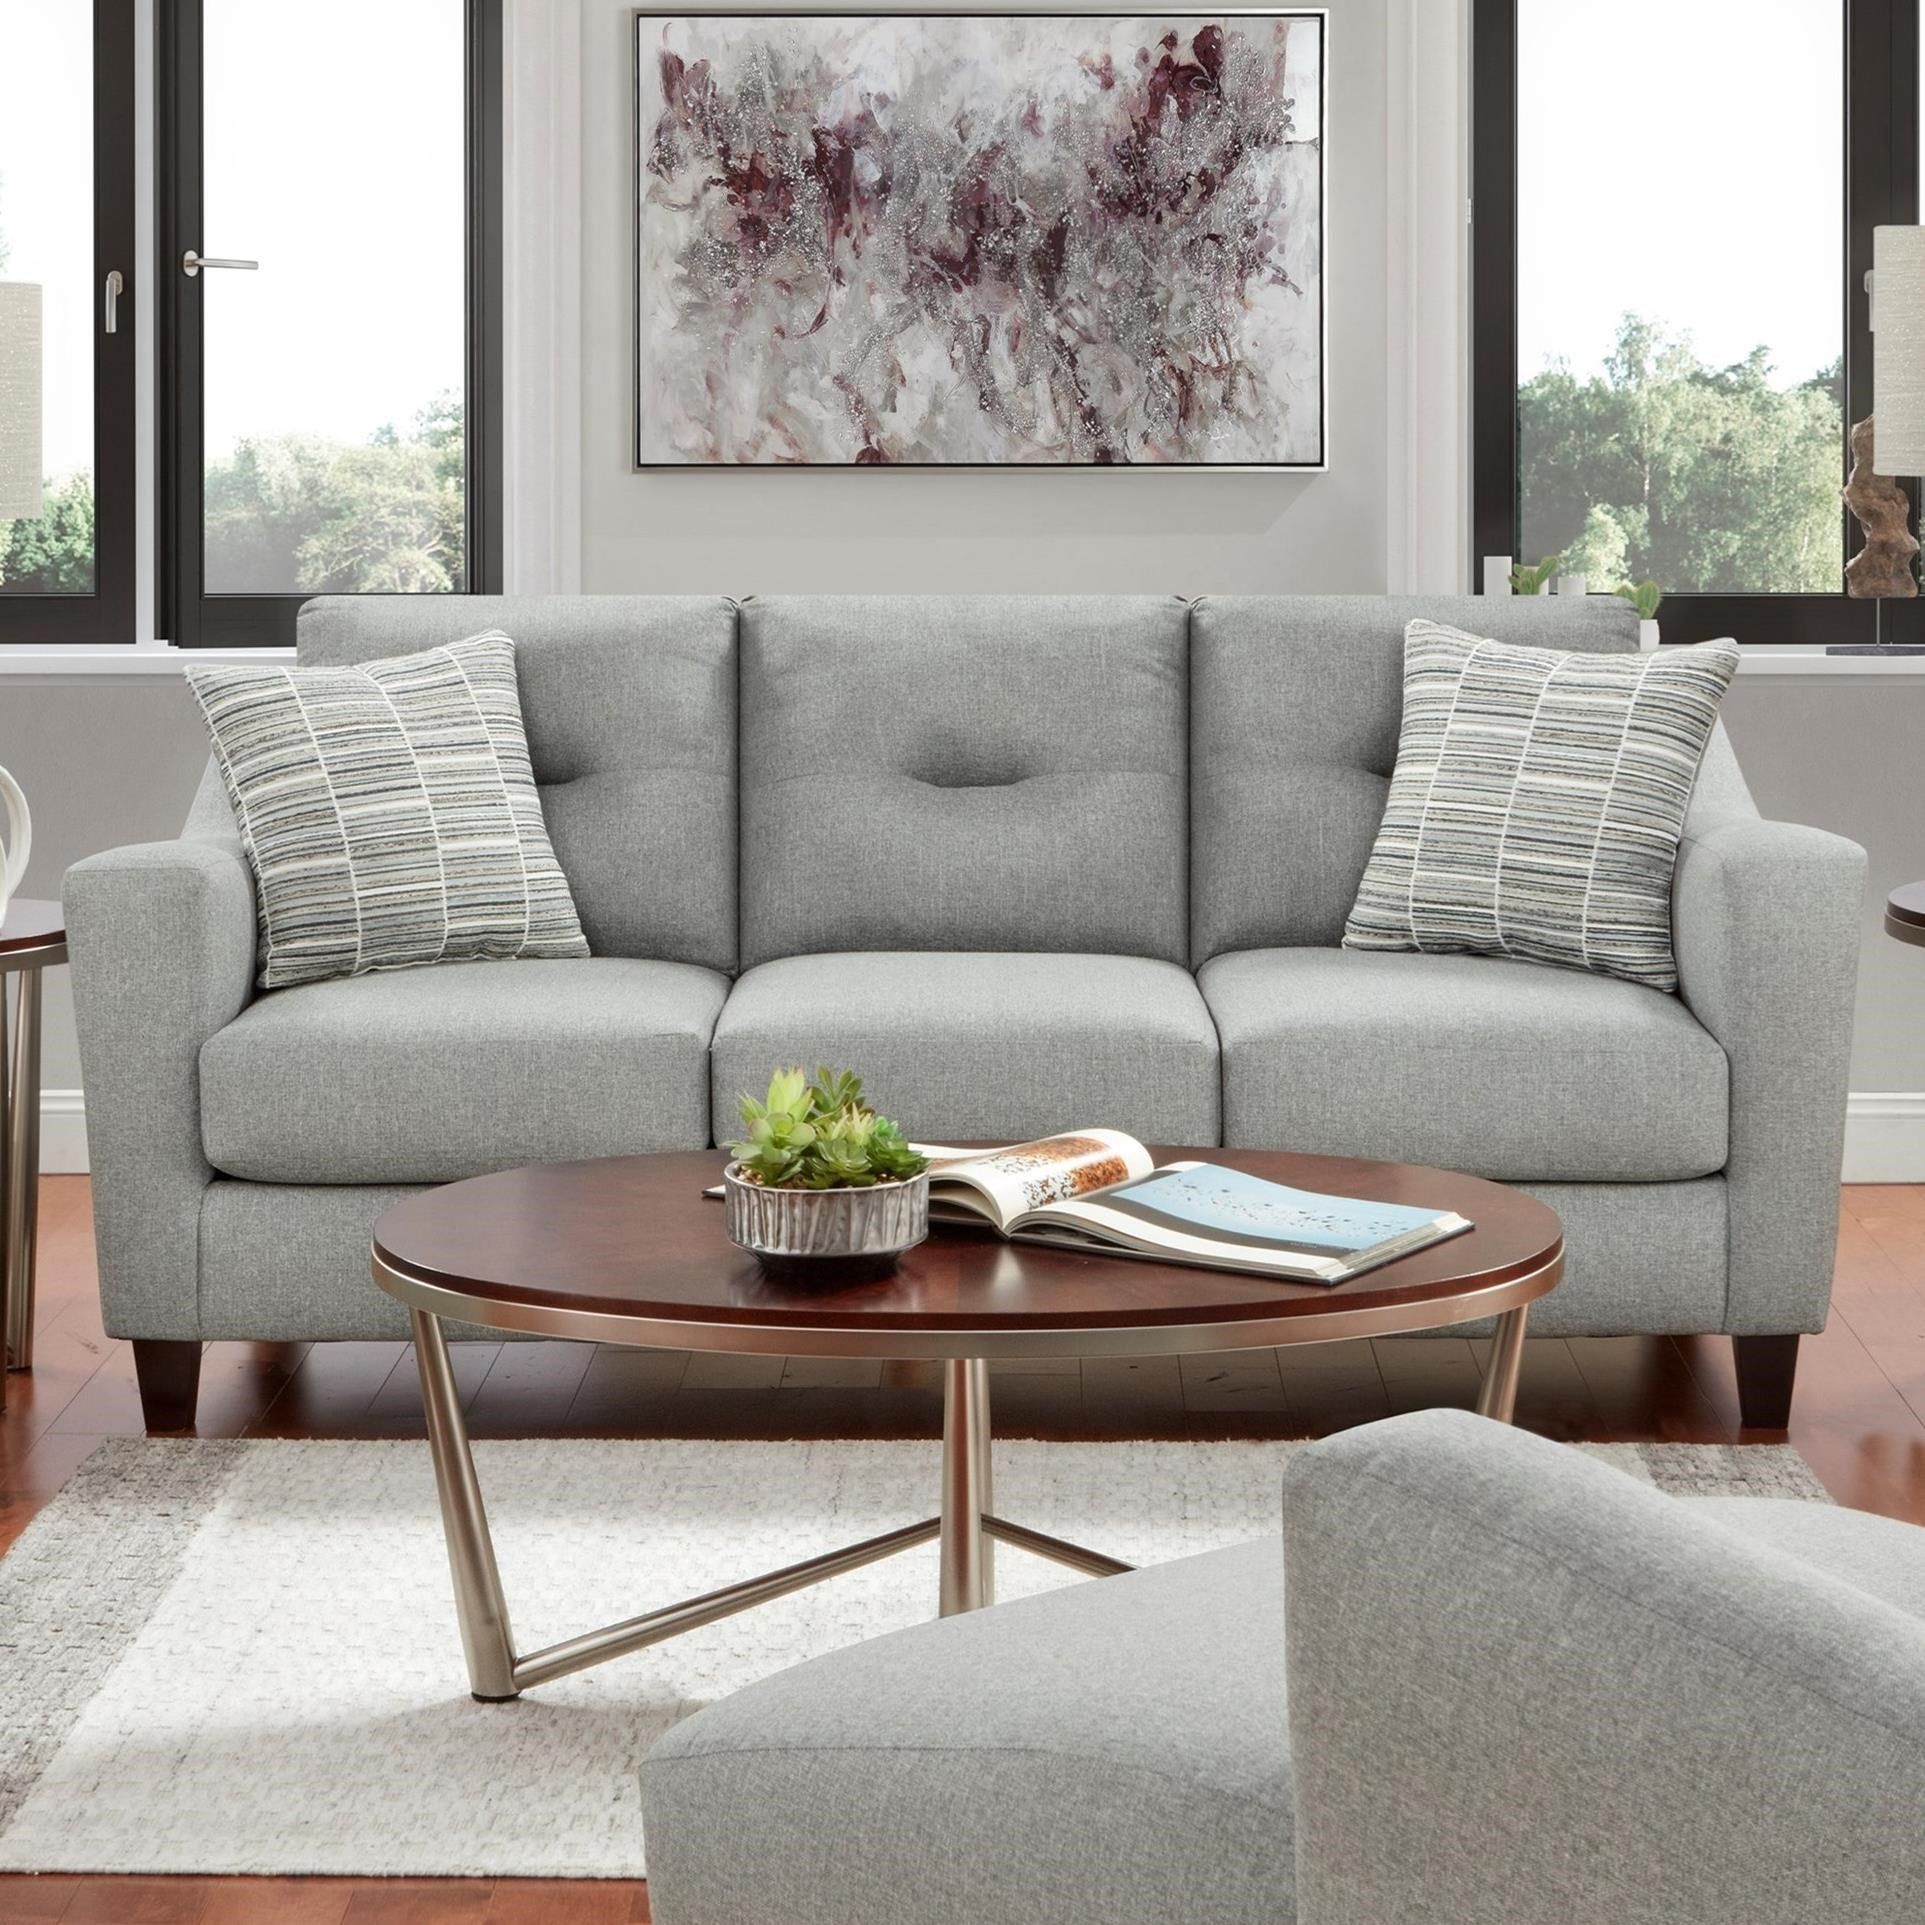 Fusion Furniture 8210 Tnt Charcoal Sofa | Howell Furniture | Uph In Light Charcoal Linen Sofas (Gallery 20 of 20)